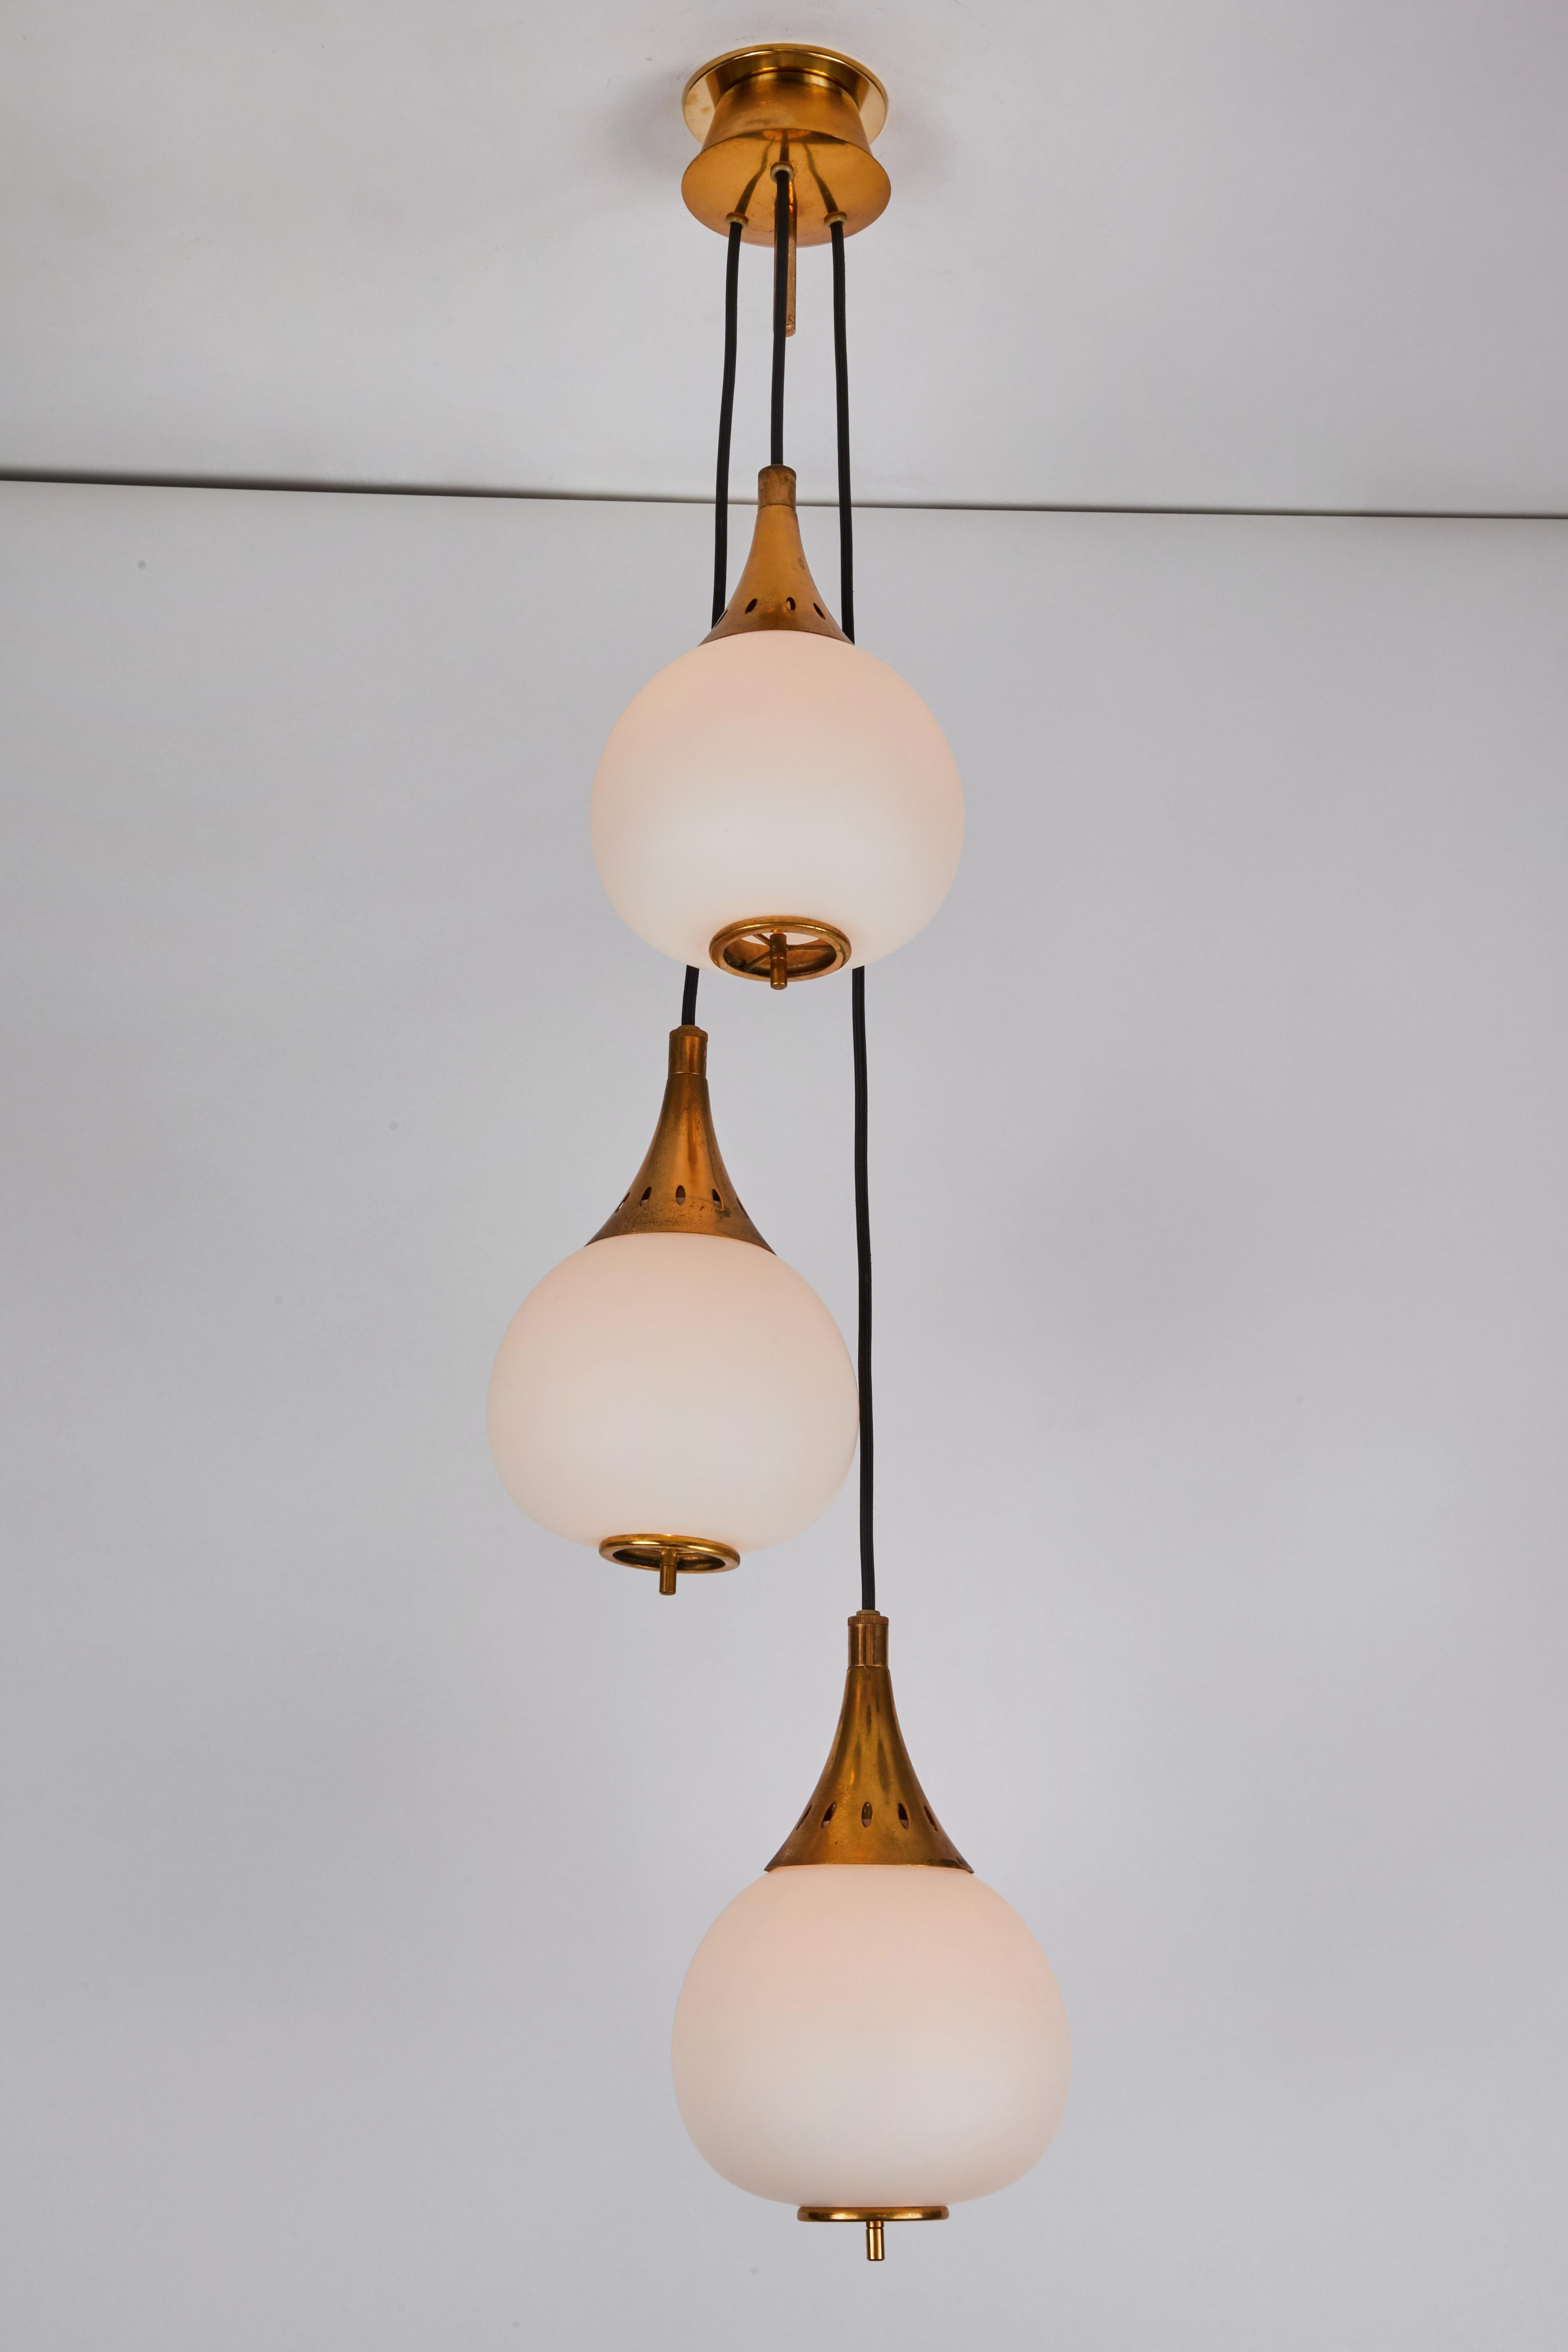 1950s Bruno Gatta brass and glass chandelier for Stilnovo. A quintessentially 1950s Italian design executed in three cascading matte finish opaline glass pendants with sculptural brass hardware and the original architectural ceiling canopy modified